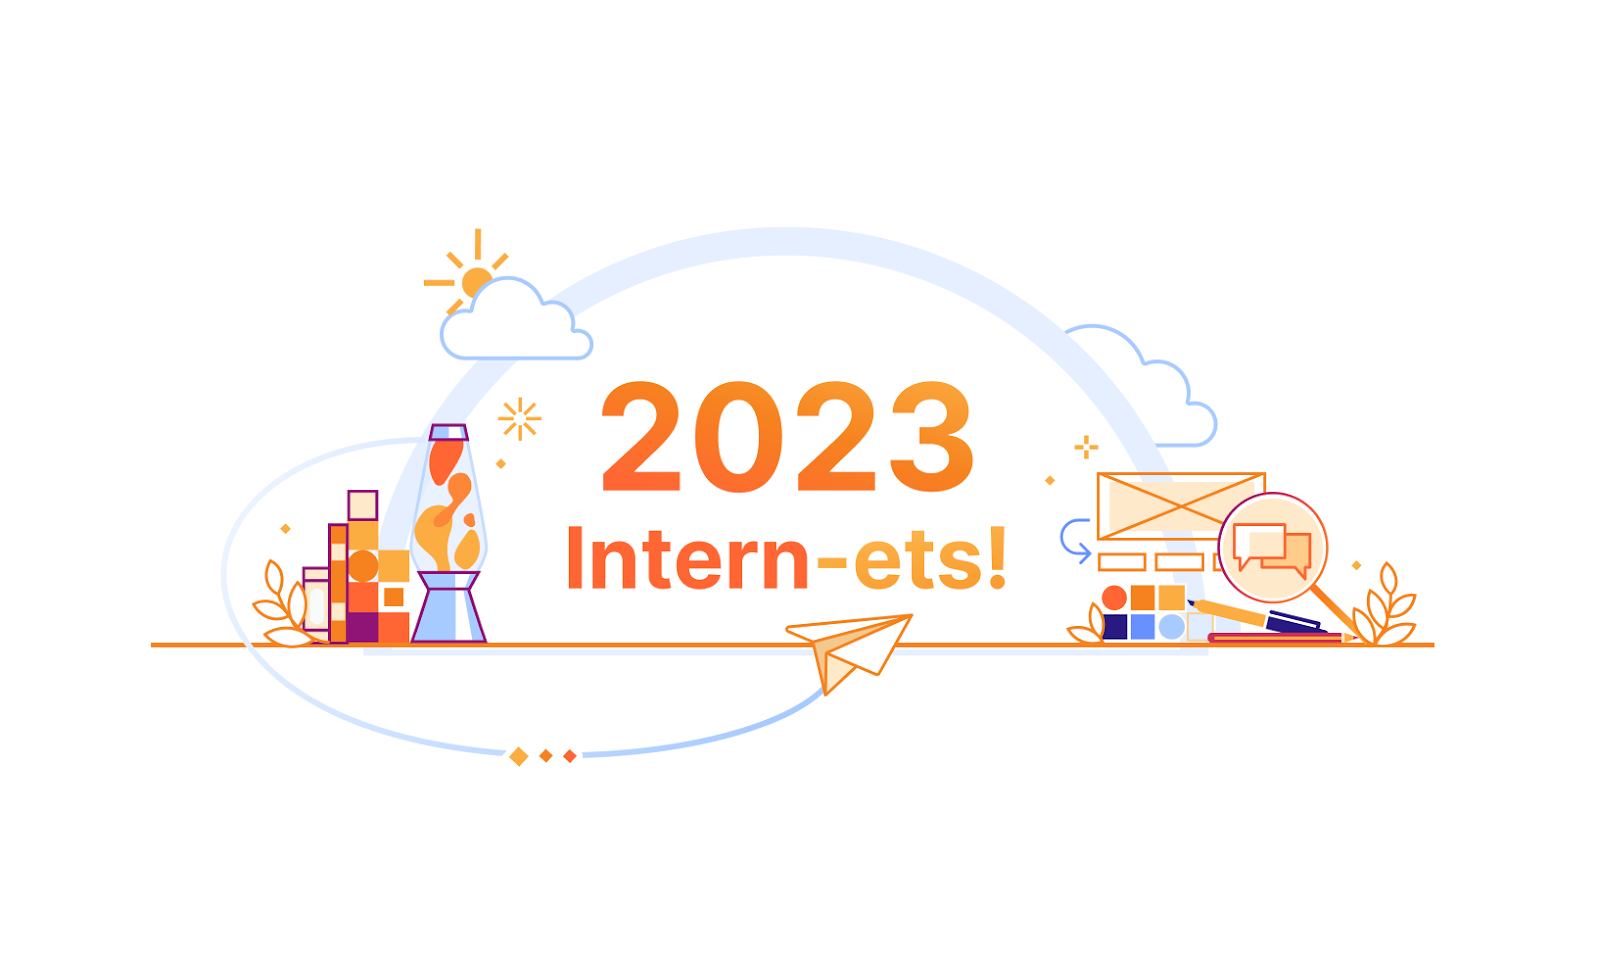 Introducing the 2023 Intern-ets!